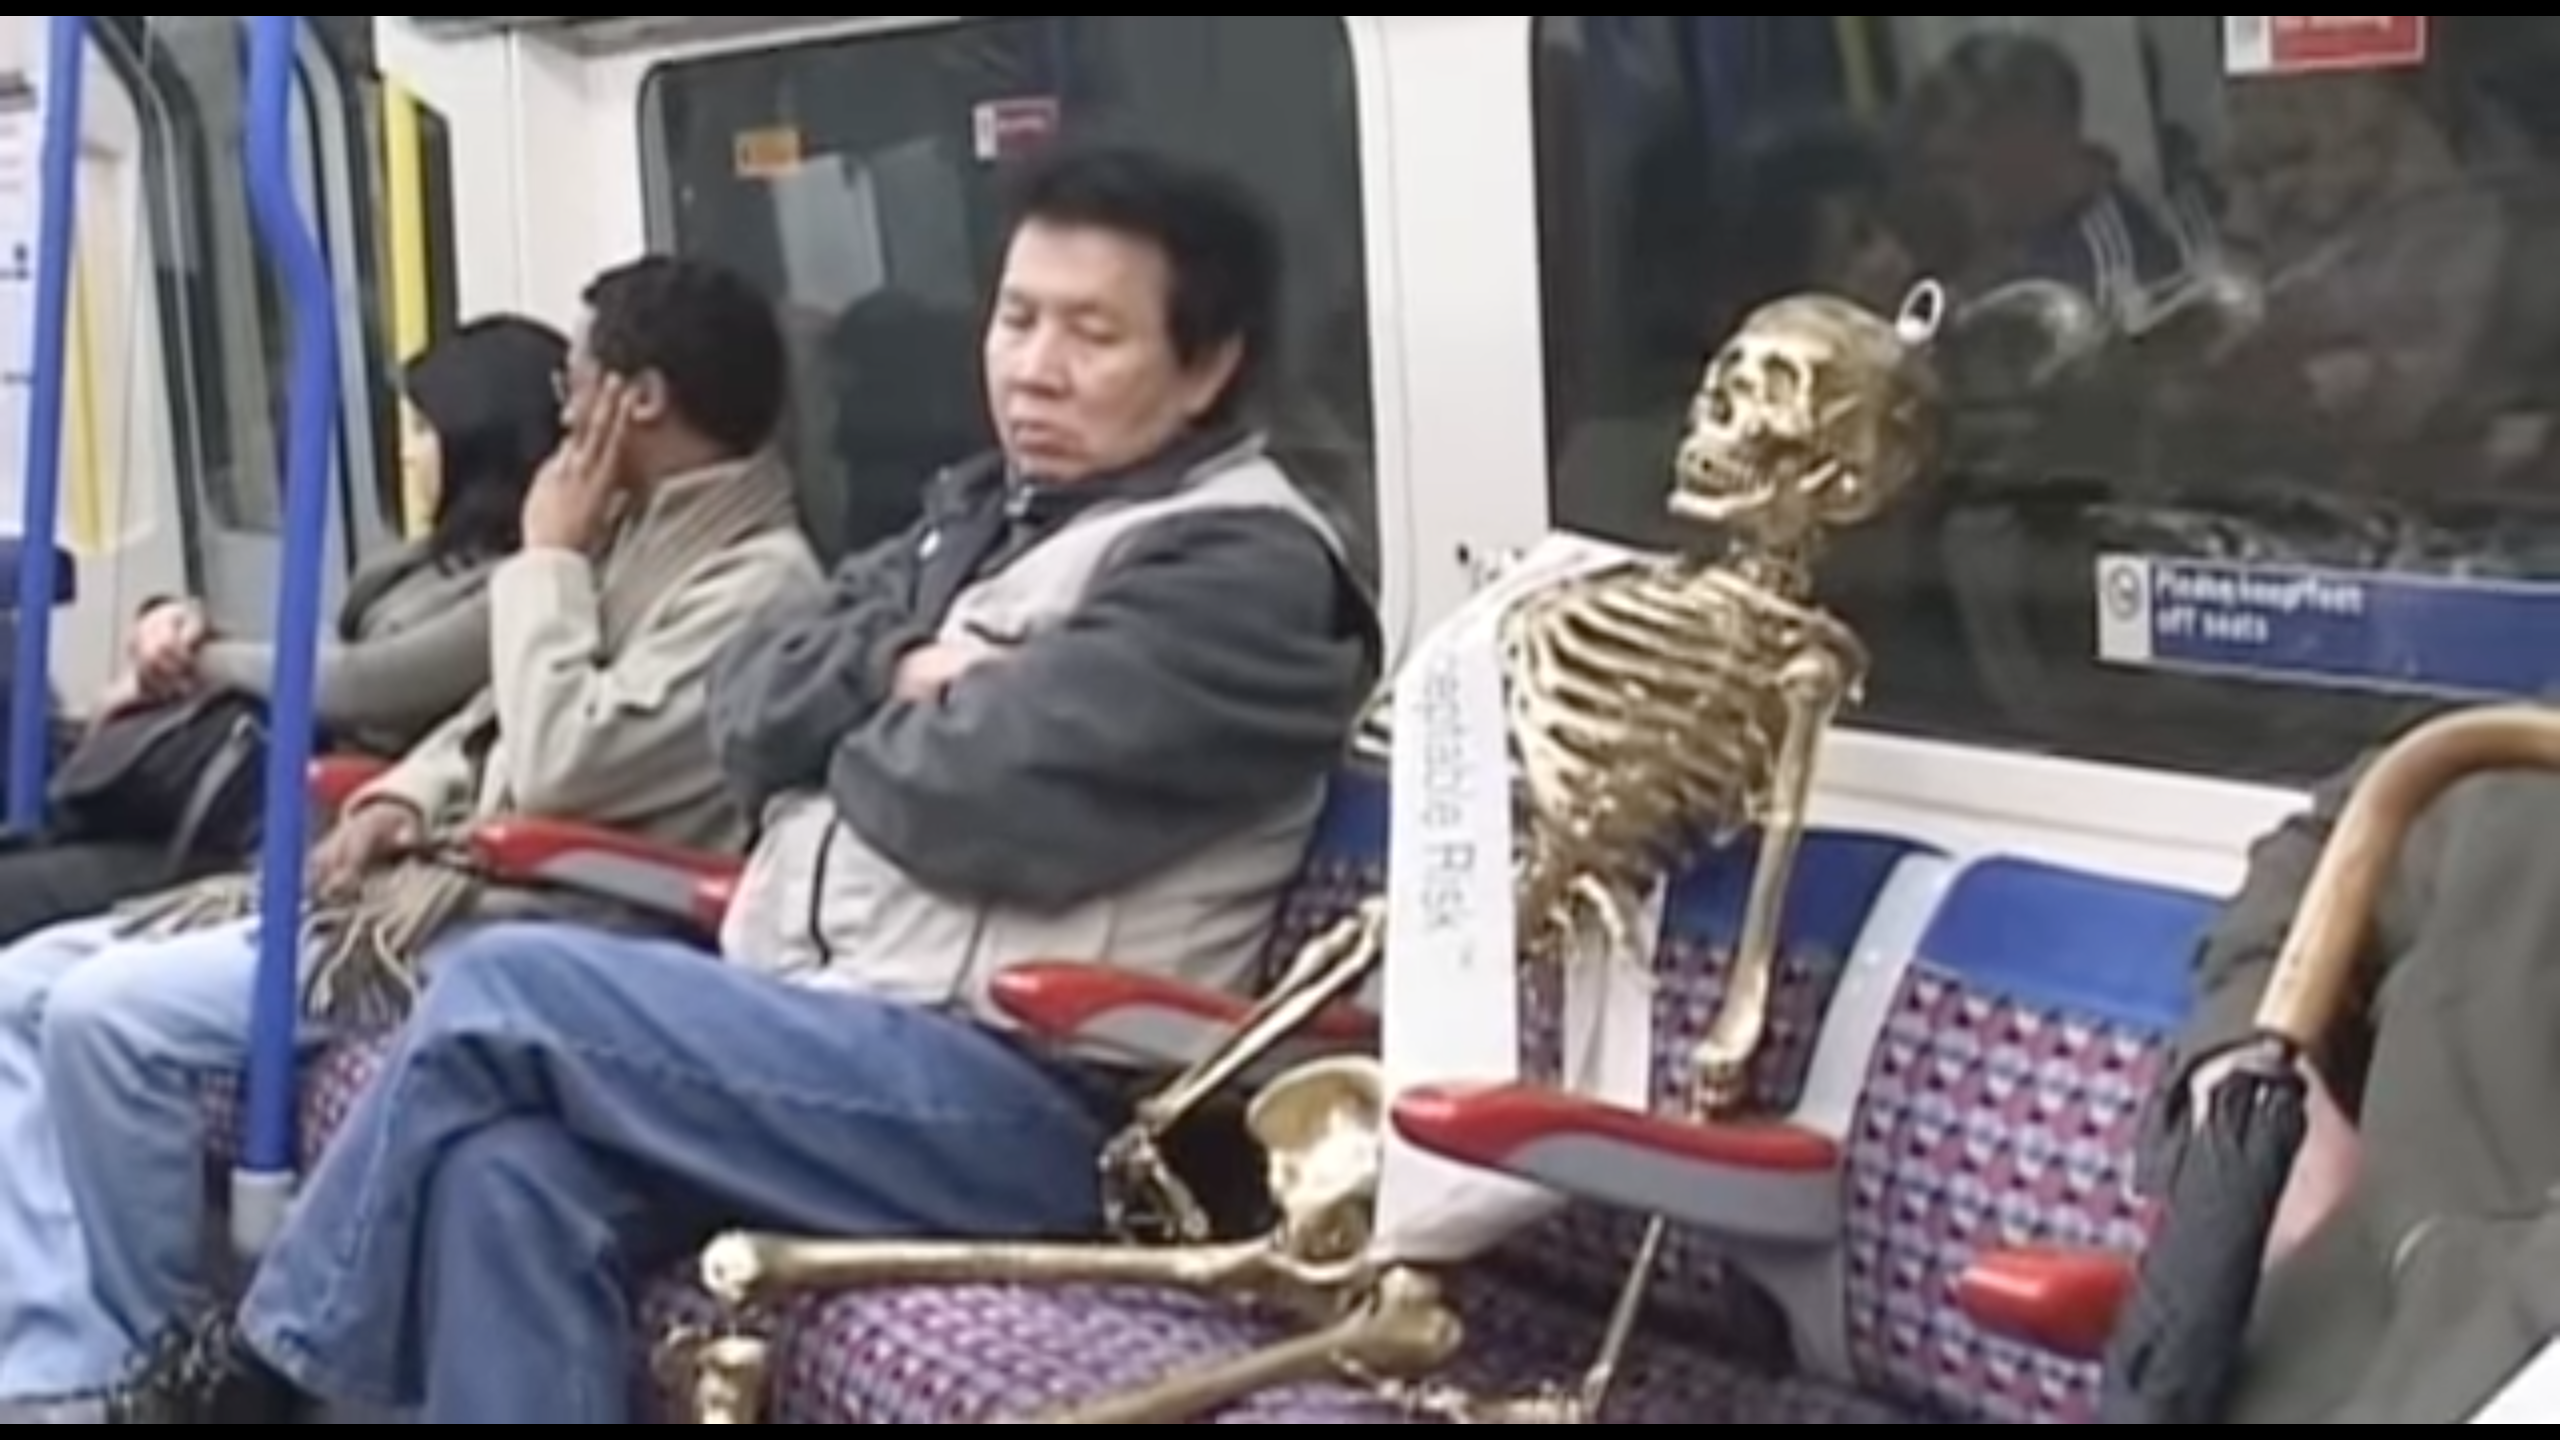 A screenshot in which a fake golden skeleton is seated on London public transit next to several people.